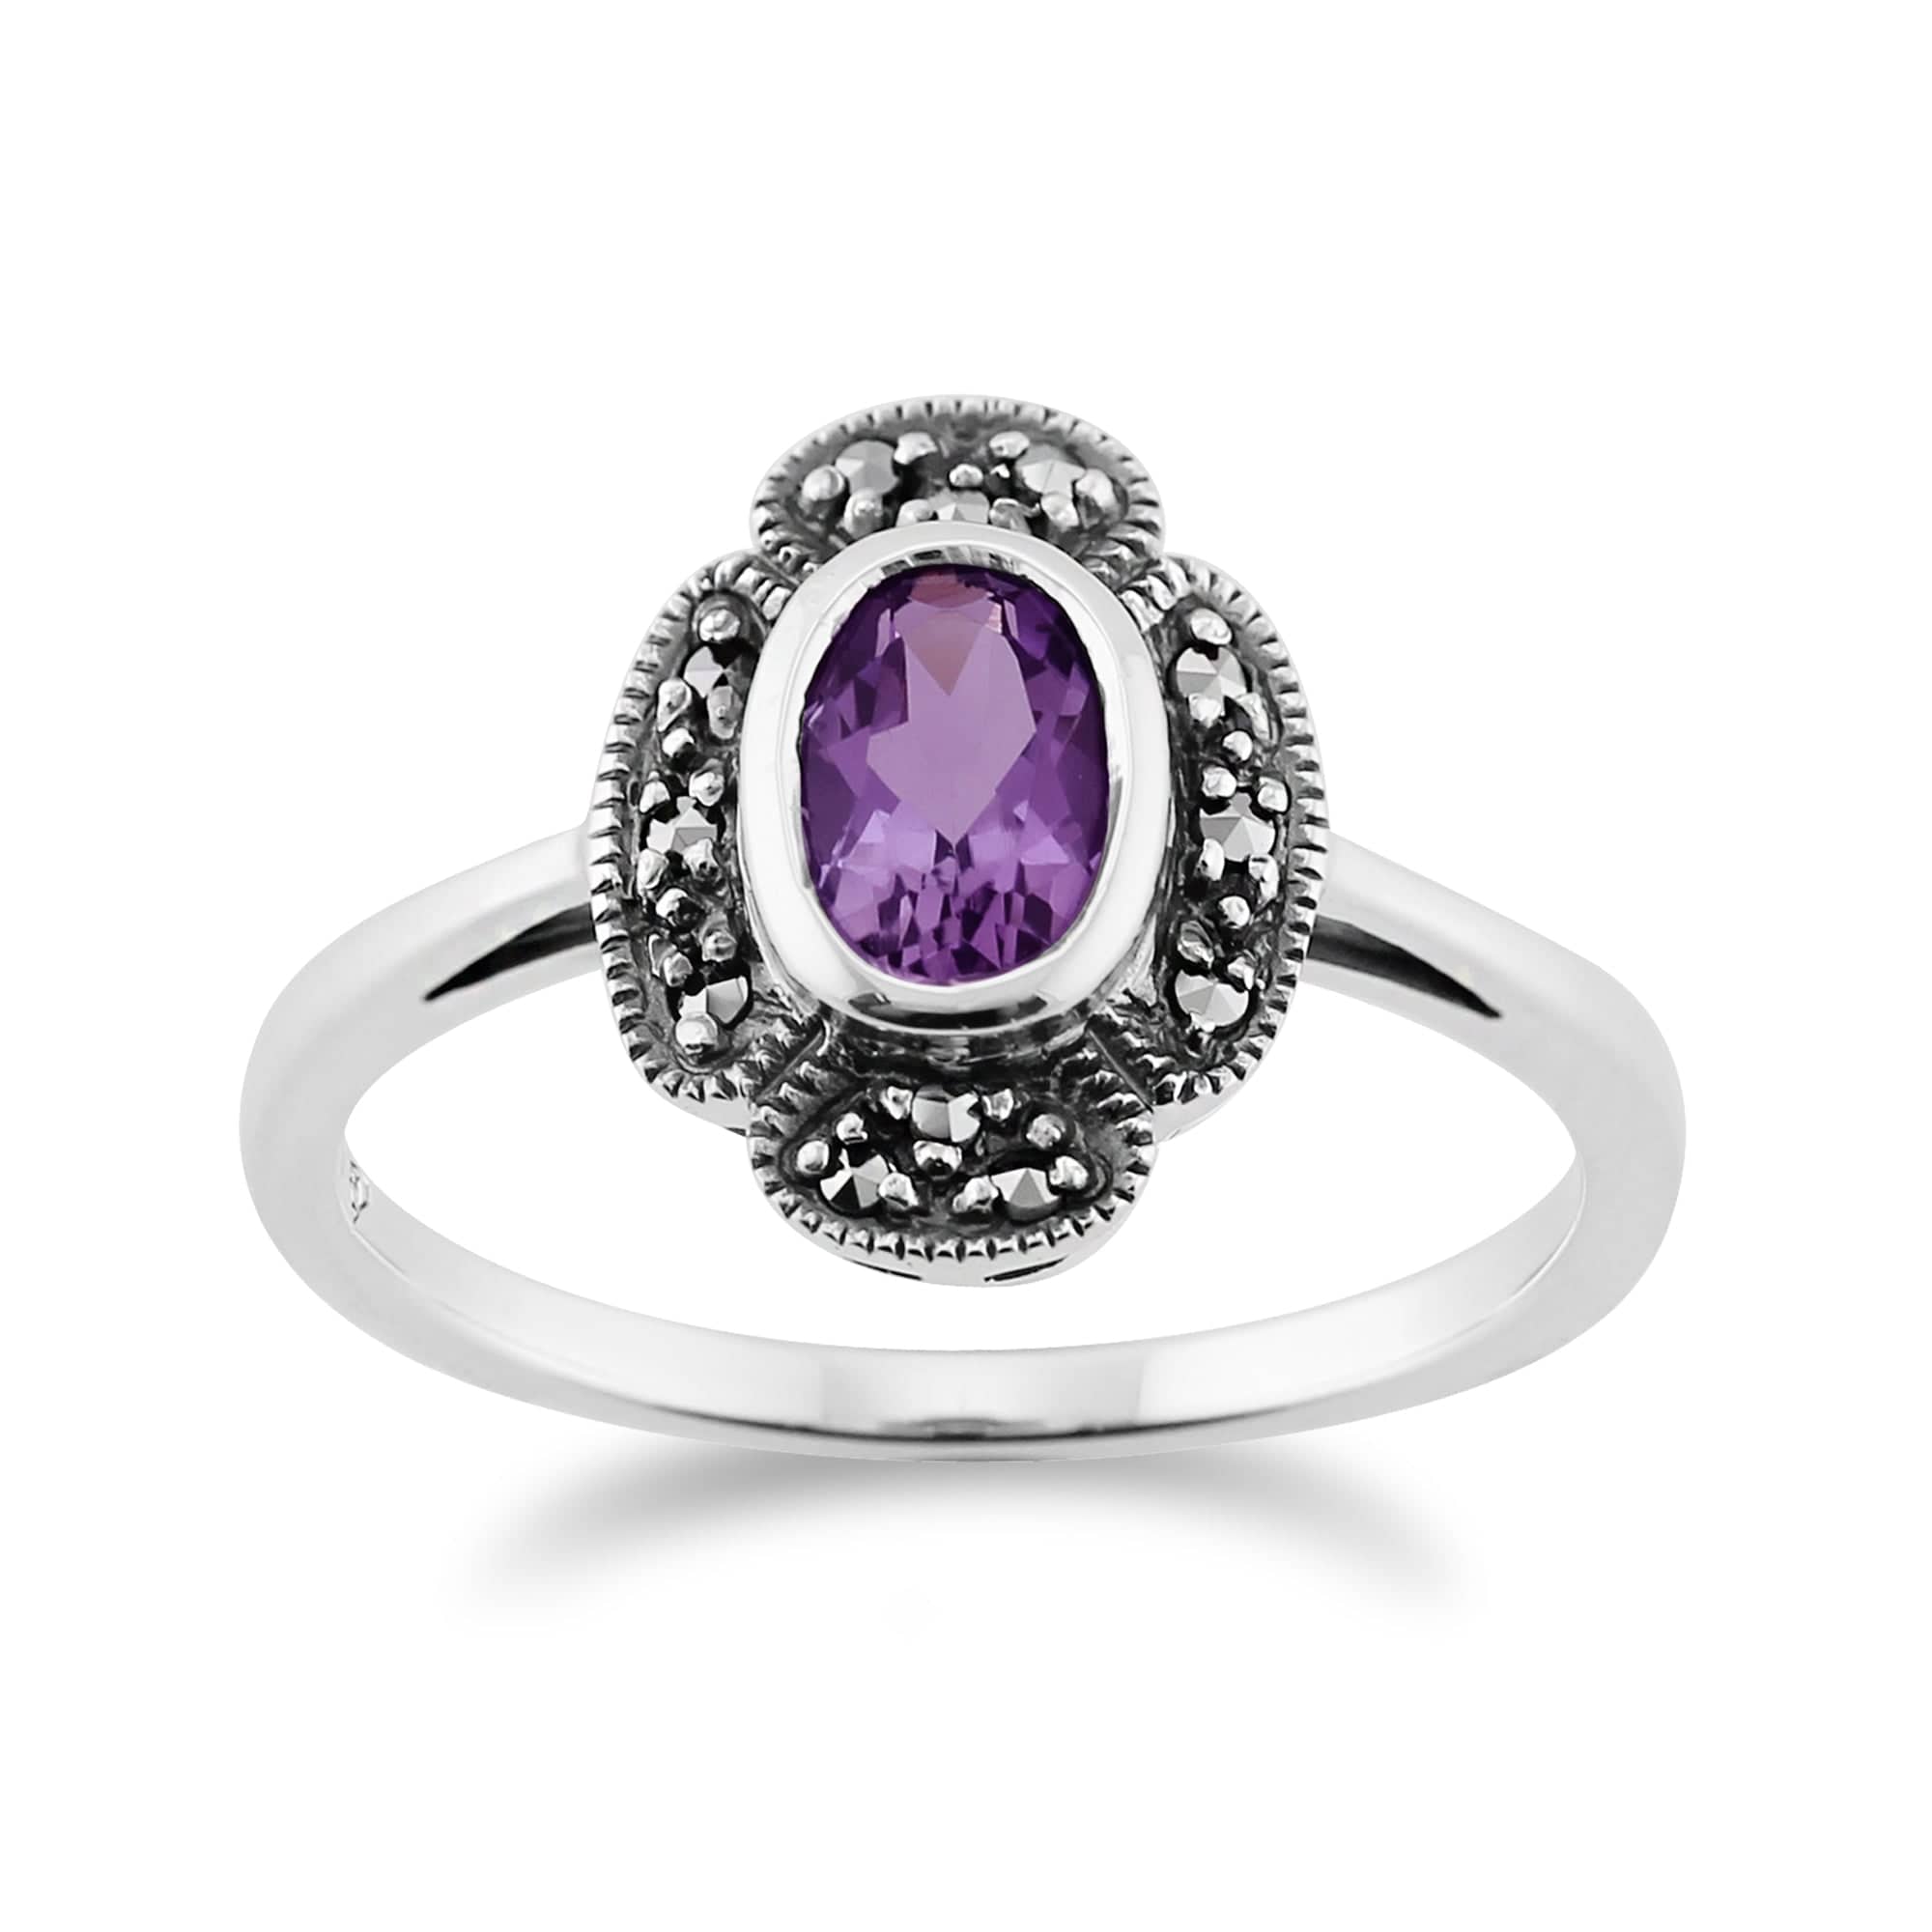 Art Deco Style Oval Amethyst & Marcasite Ring in 925 Sterling Silver - Gemondo